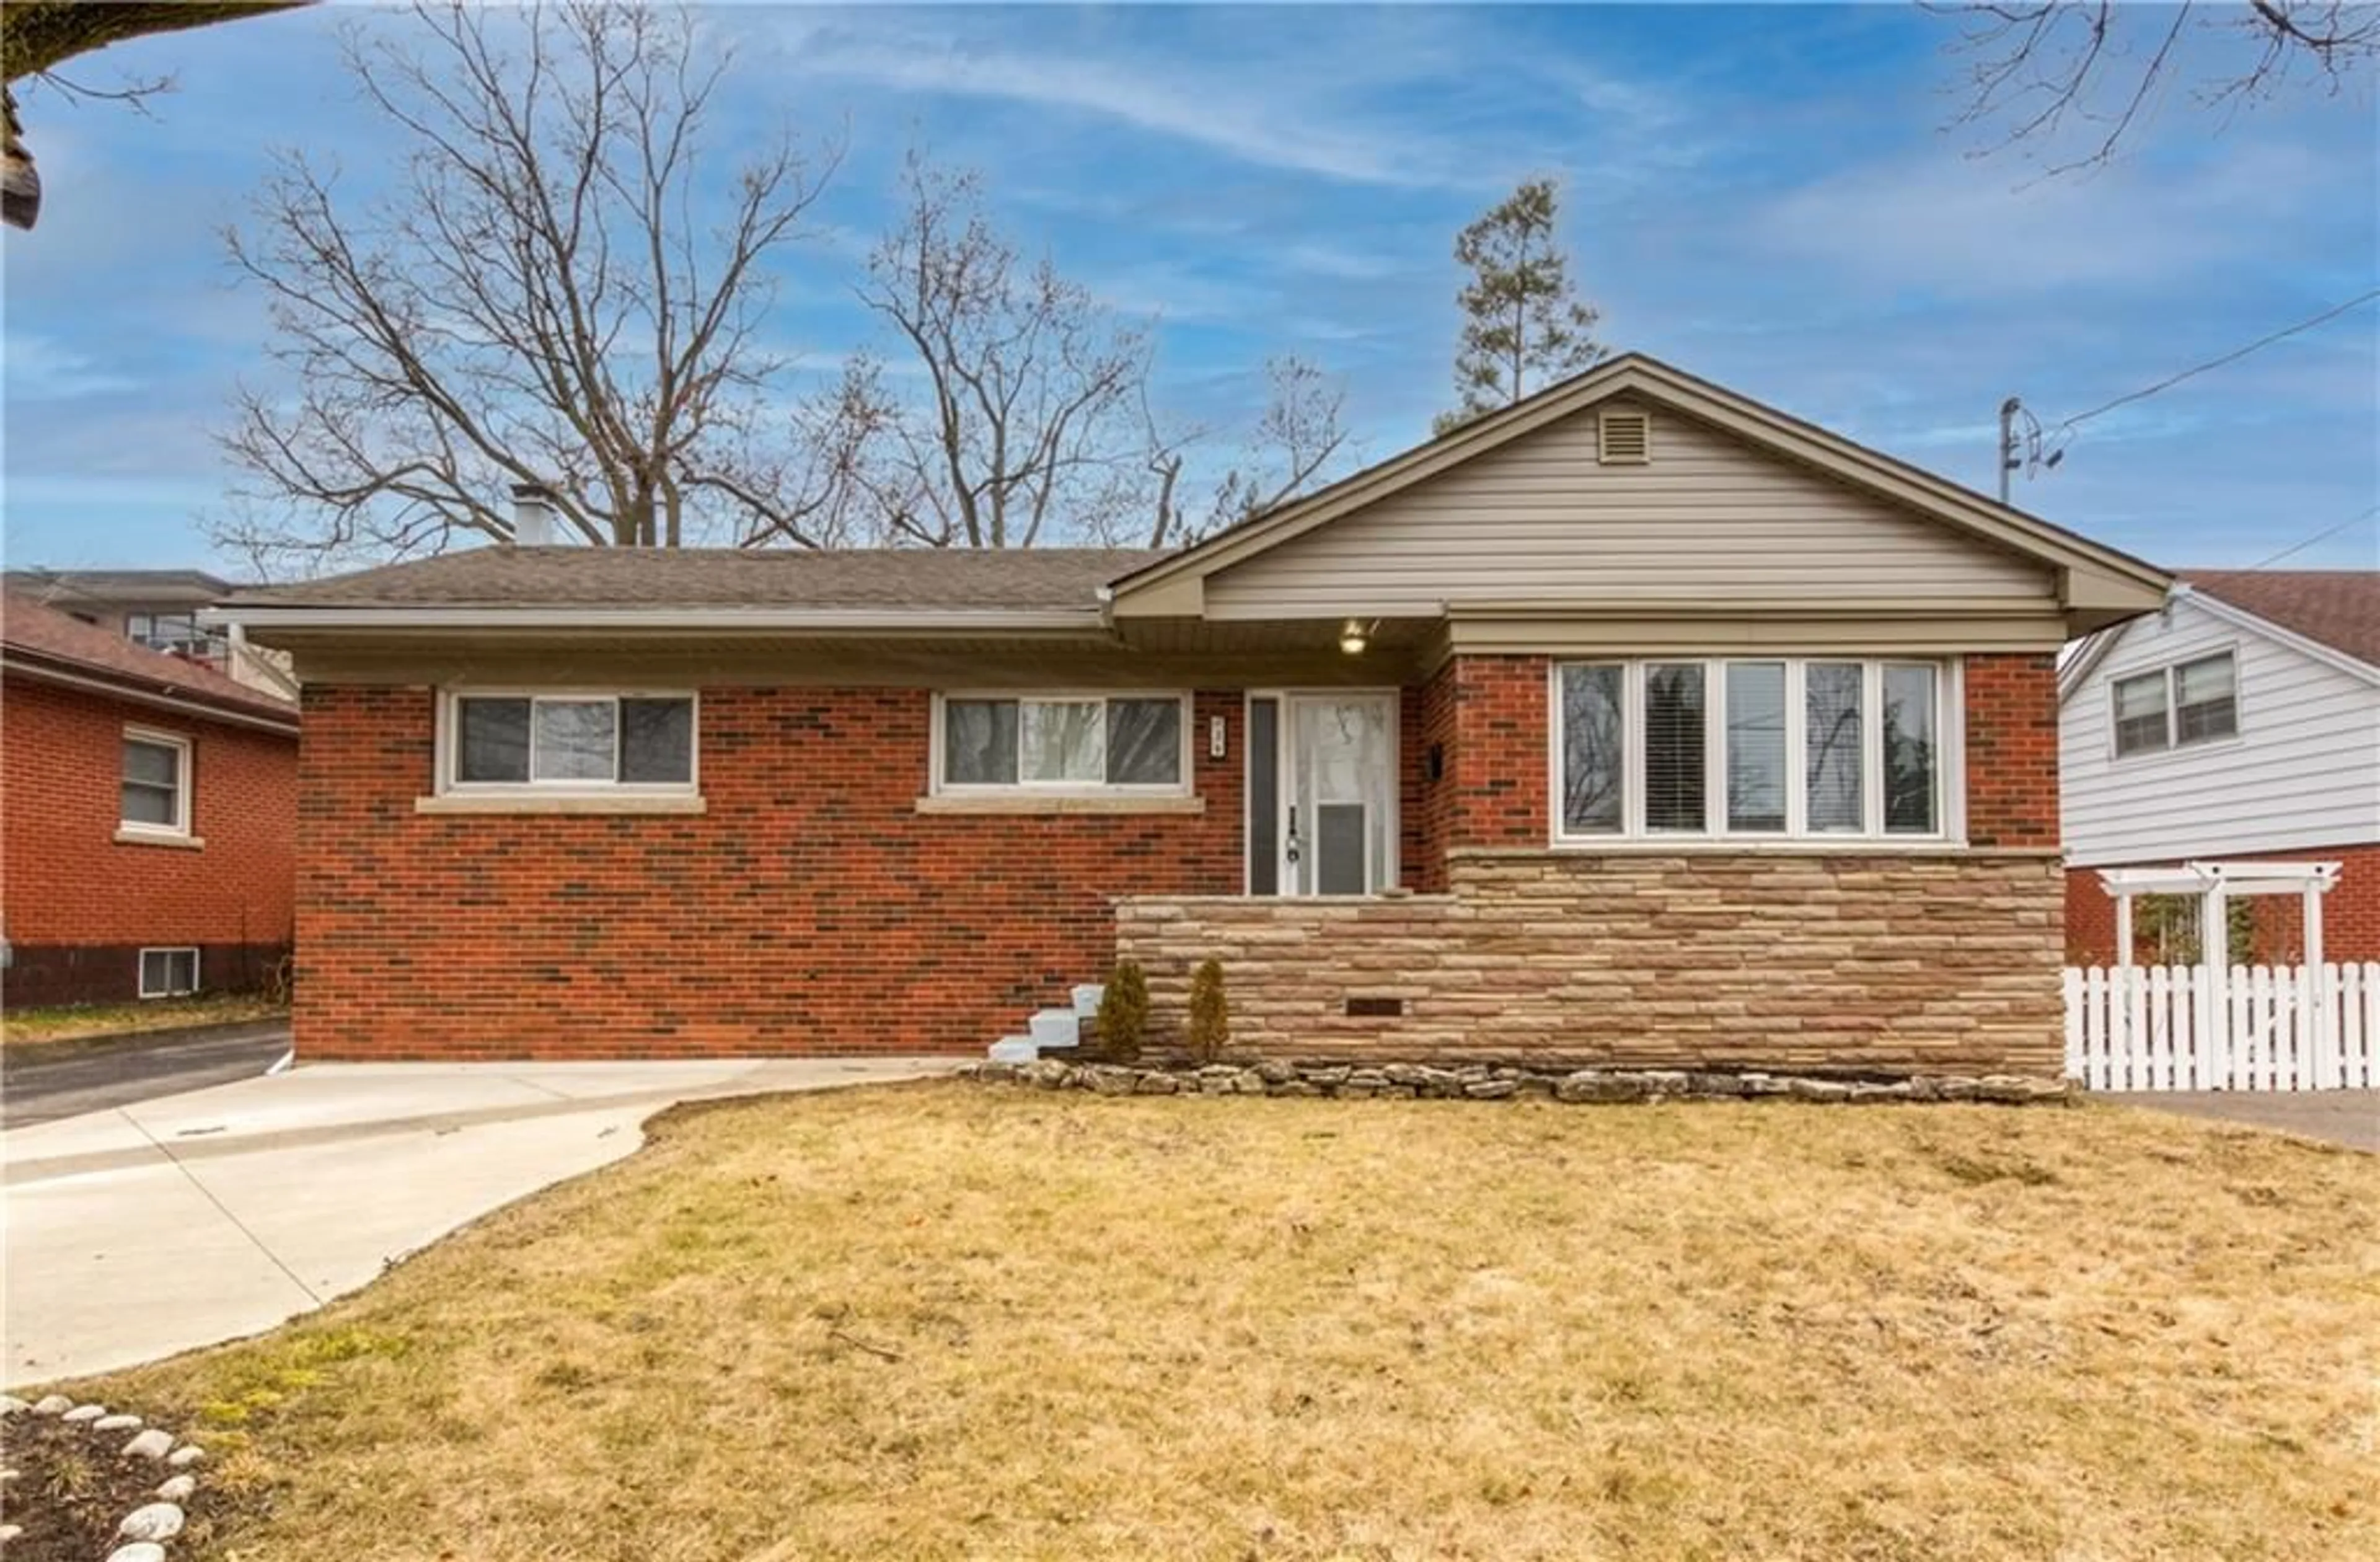 Home with brick exterior material for 39 BLAND Ave, Stoney Creek Ontario L8G 3R2